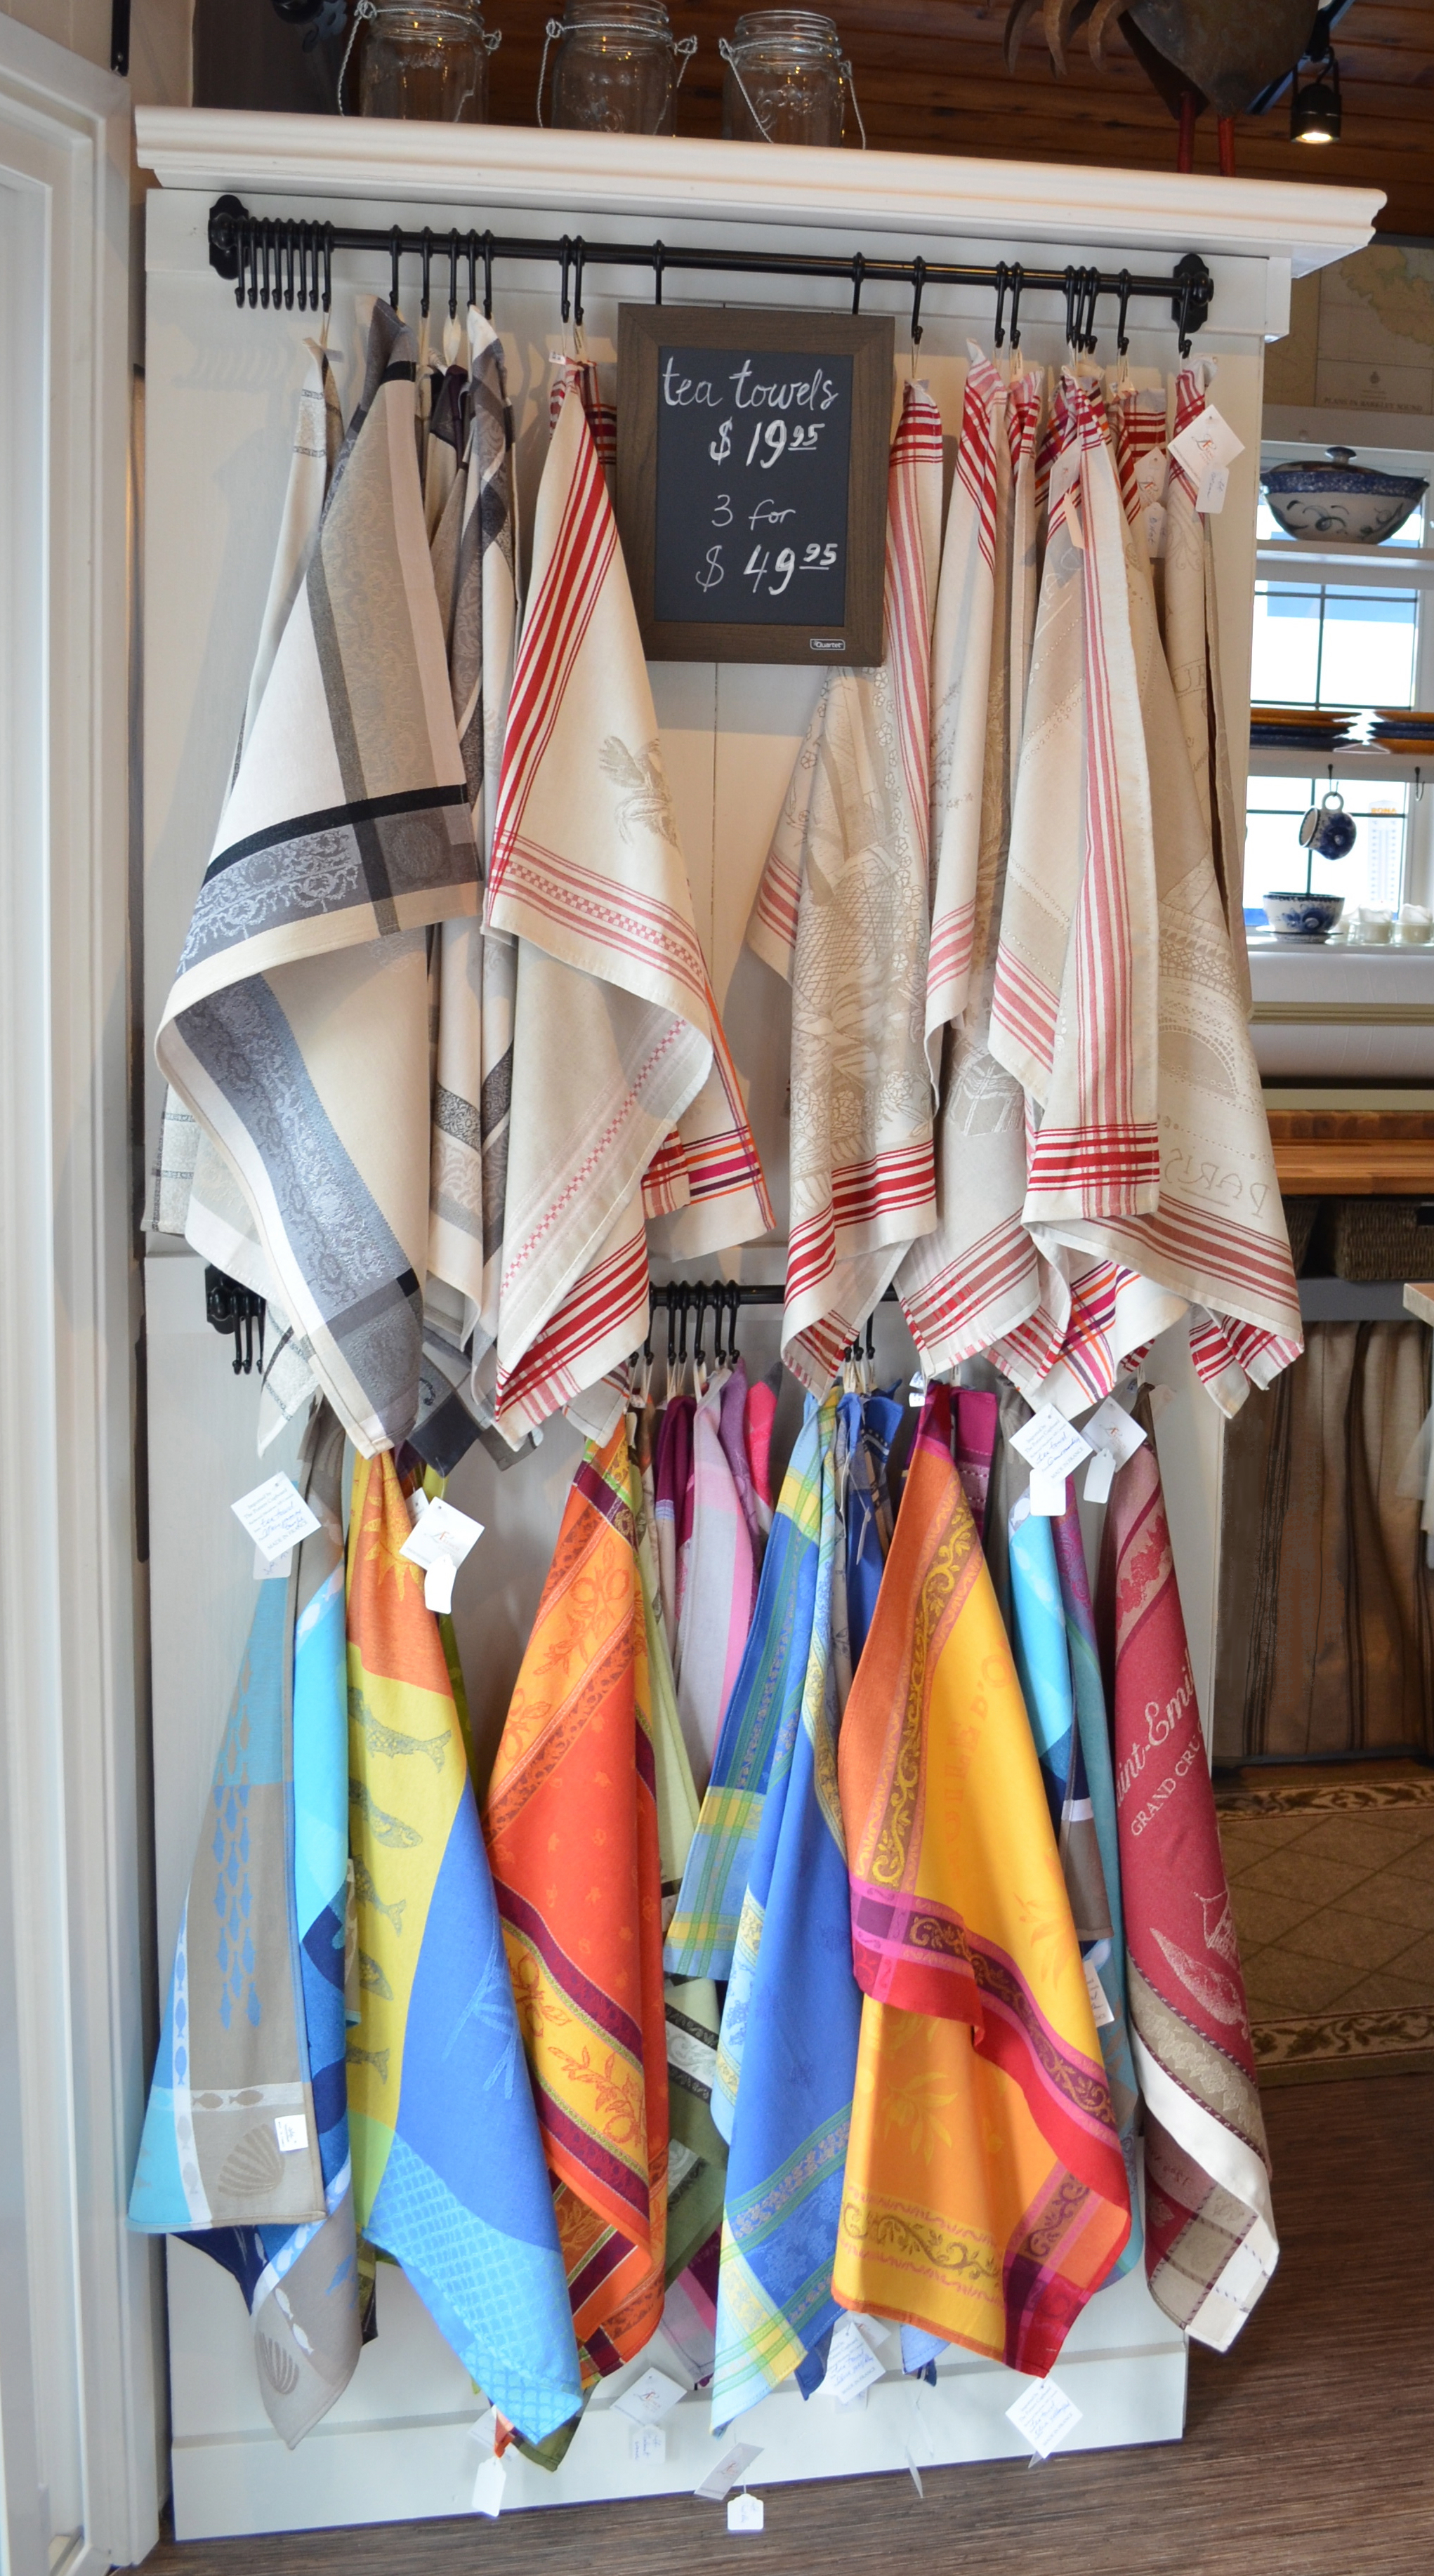 French Jacquard Tea Towels displayed hanging on the hooks inside 4 Winds Nest Artisans - our store in Victoria, BC